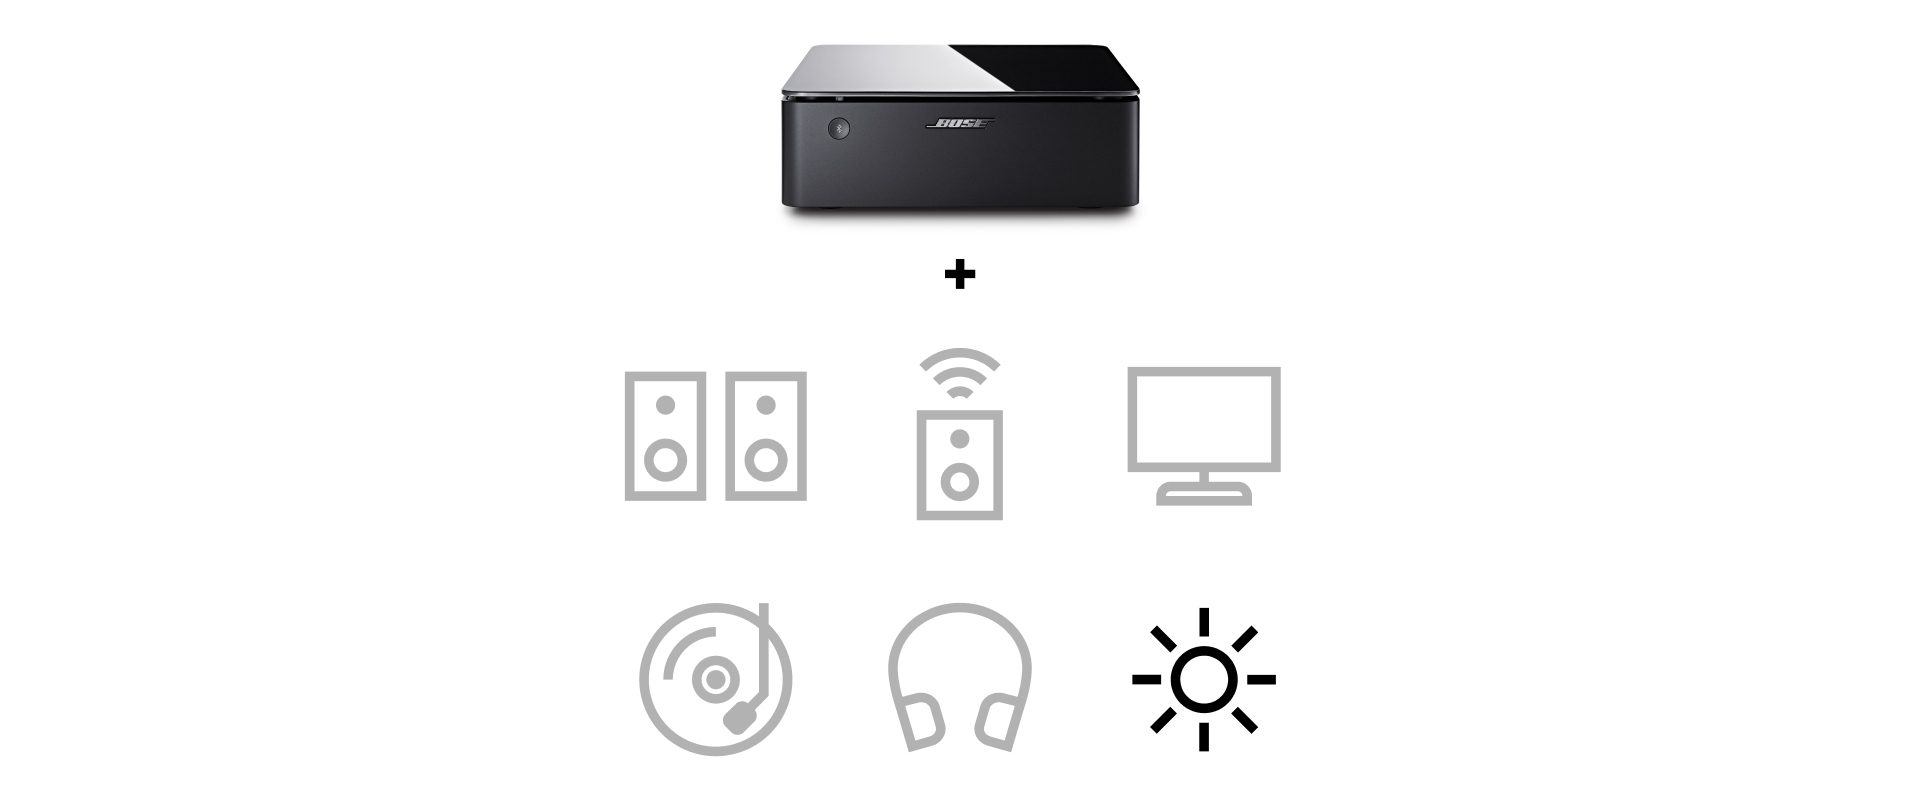 Bose Music Amplifier Speaker Amplifier with Bluetooth & Wi-Fi connectivity